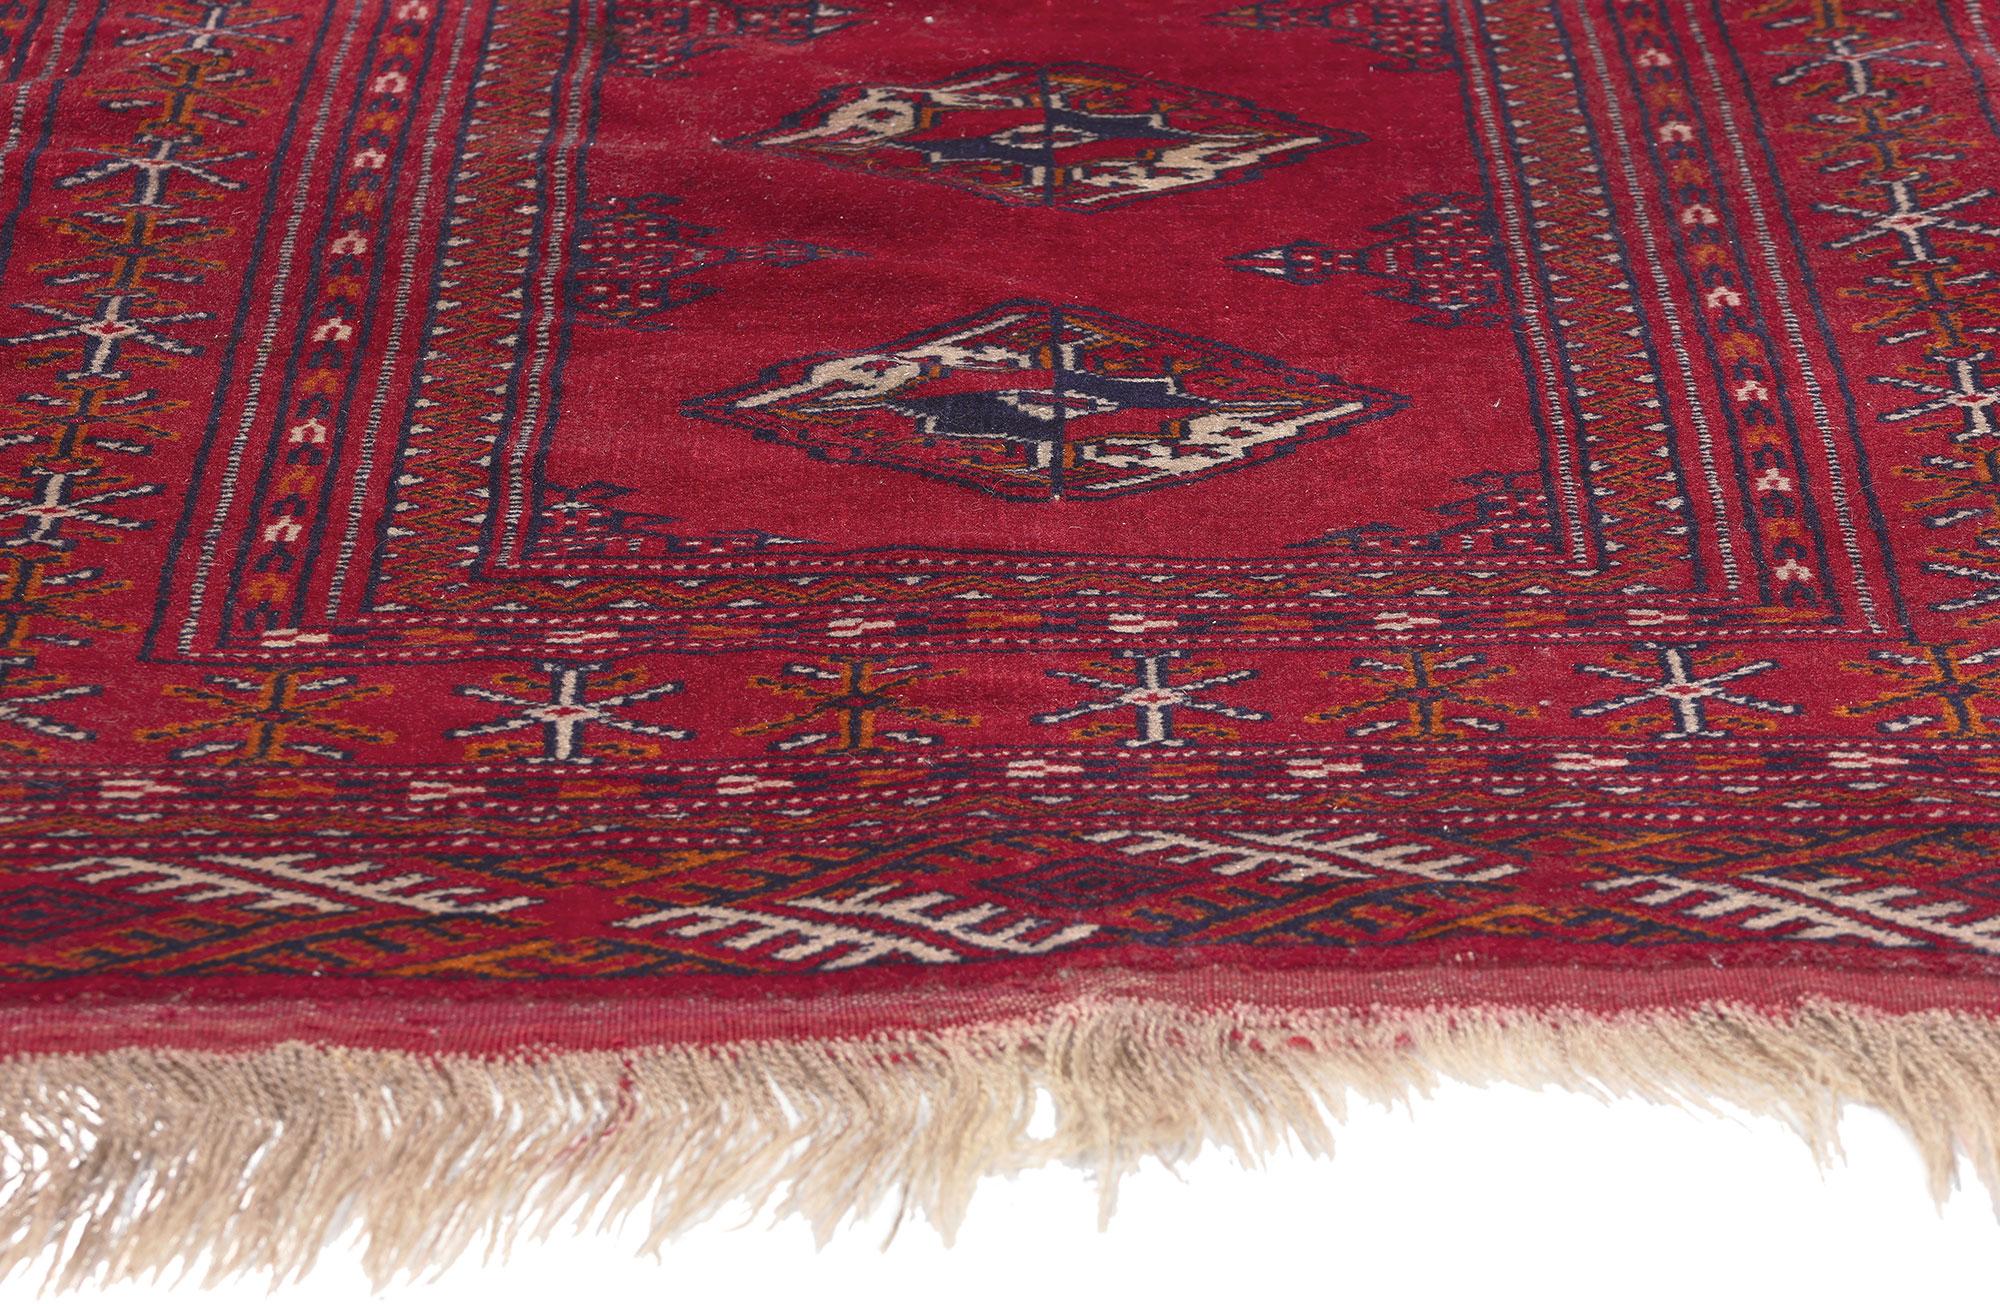 Vintage Persian Turkoman Rug, Dark and Moody Nomad Meets Tribal Enchantment In Good Condition For Sale In Dallas, TX